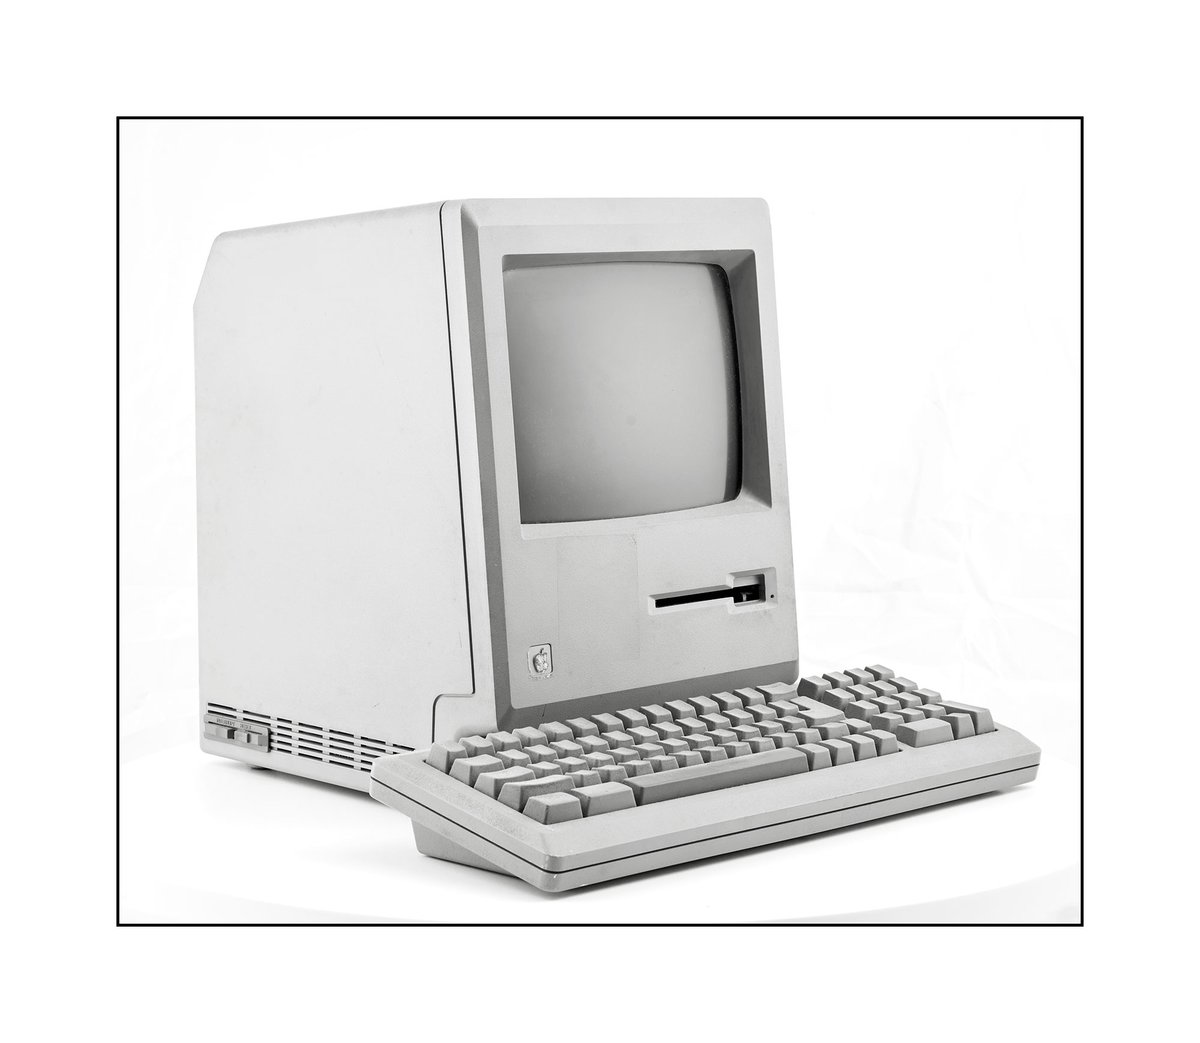 PICTURE OF THE DAY - Still got my first computer, the Mac Plus. #PictureOfTheDay #bnw #bnwphotography #blackandwhitephotography #blackandwhite #MacPlus #Apple #Macintosh #studiophotography #productphotography #archivephotography @Apple @rosie_thomo9